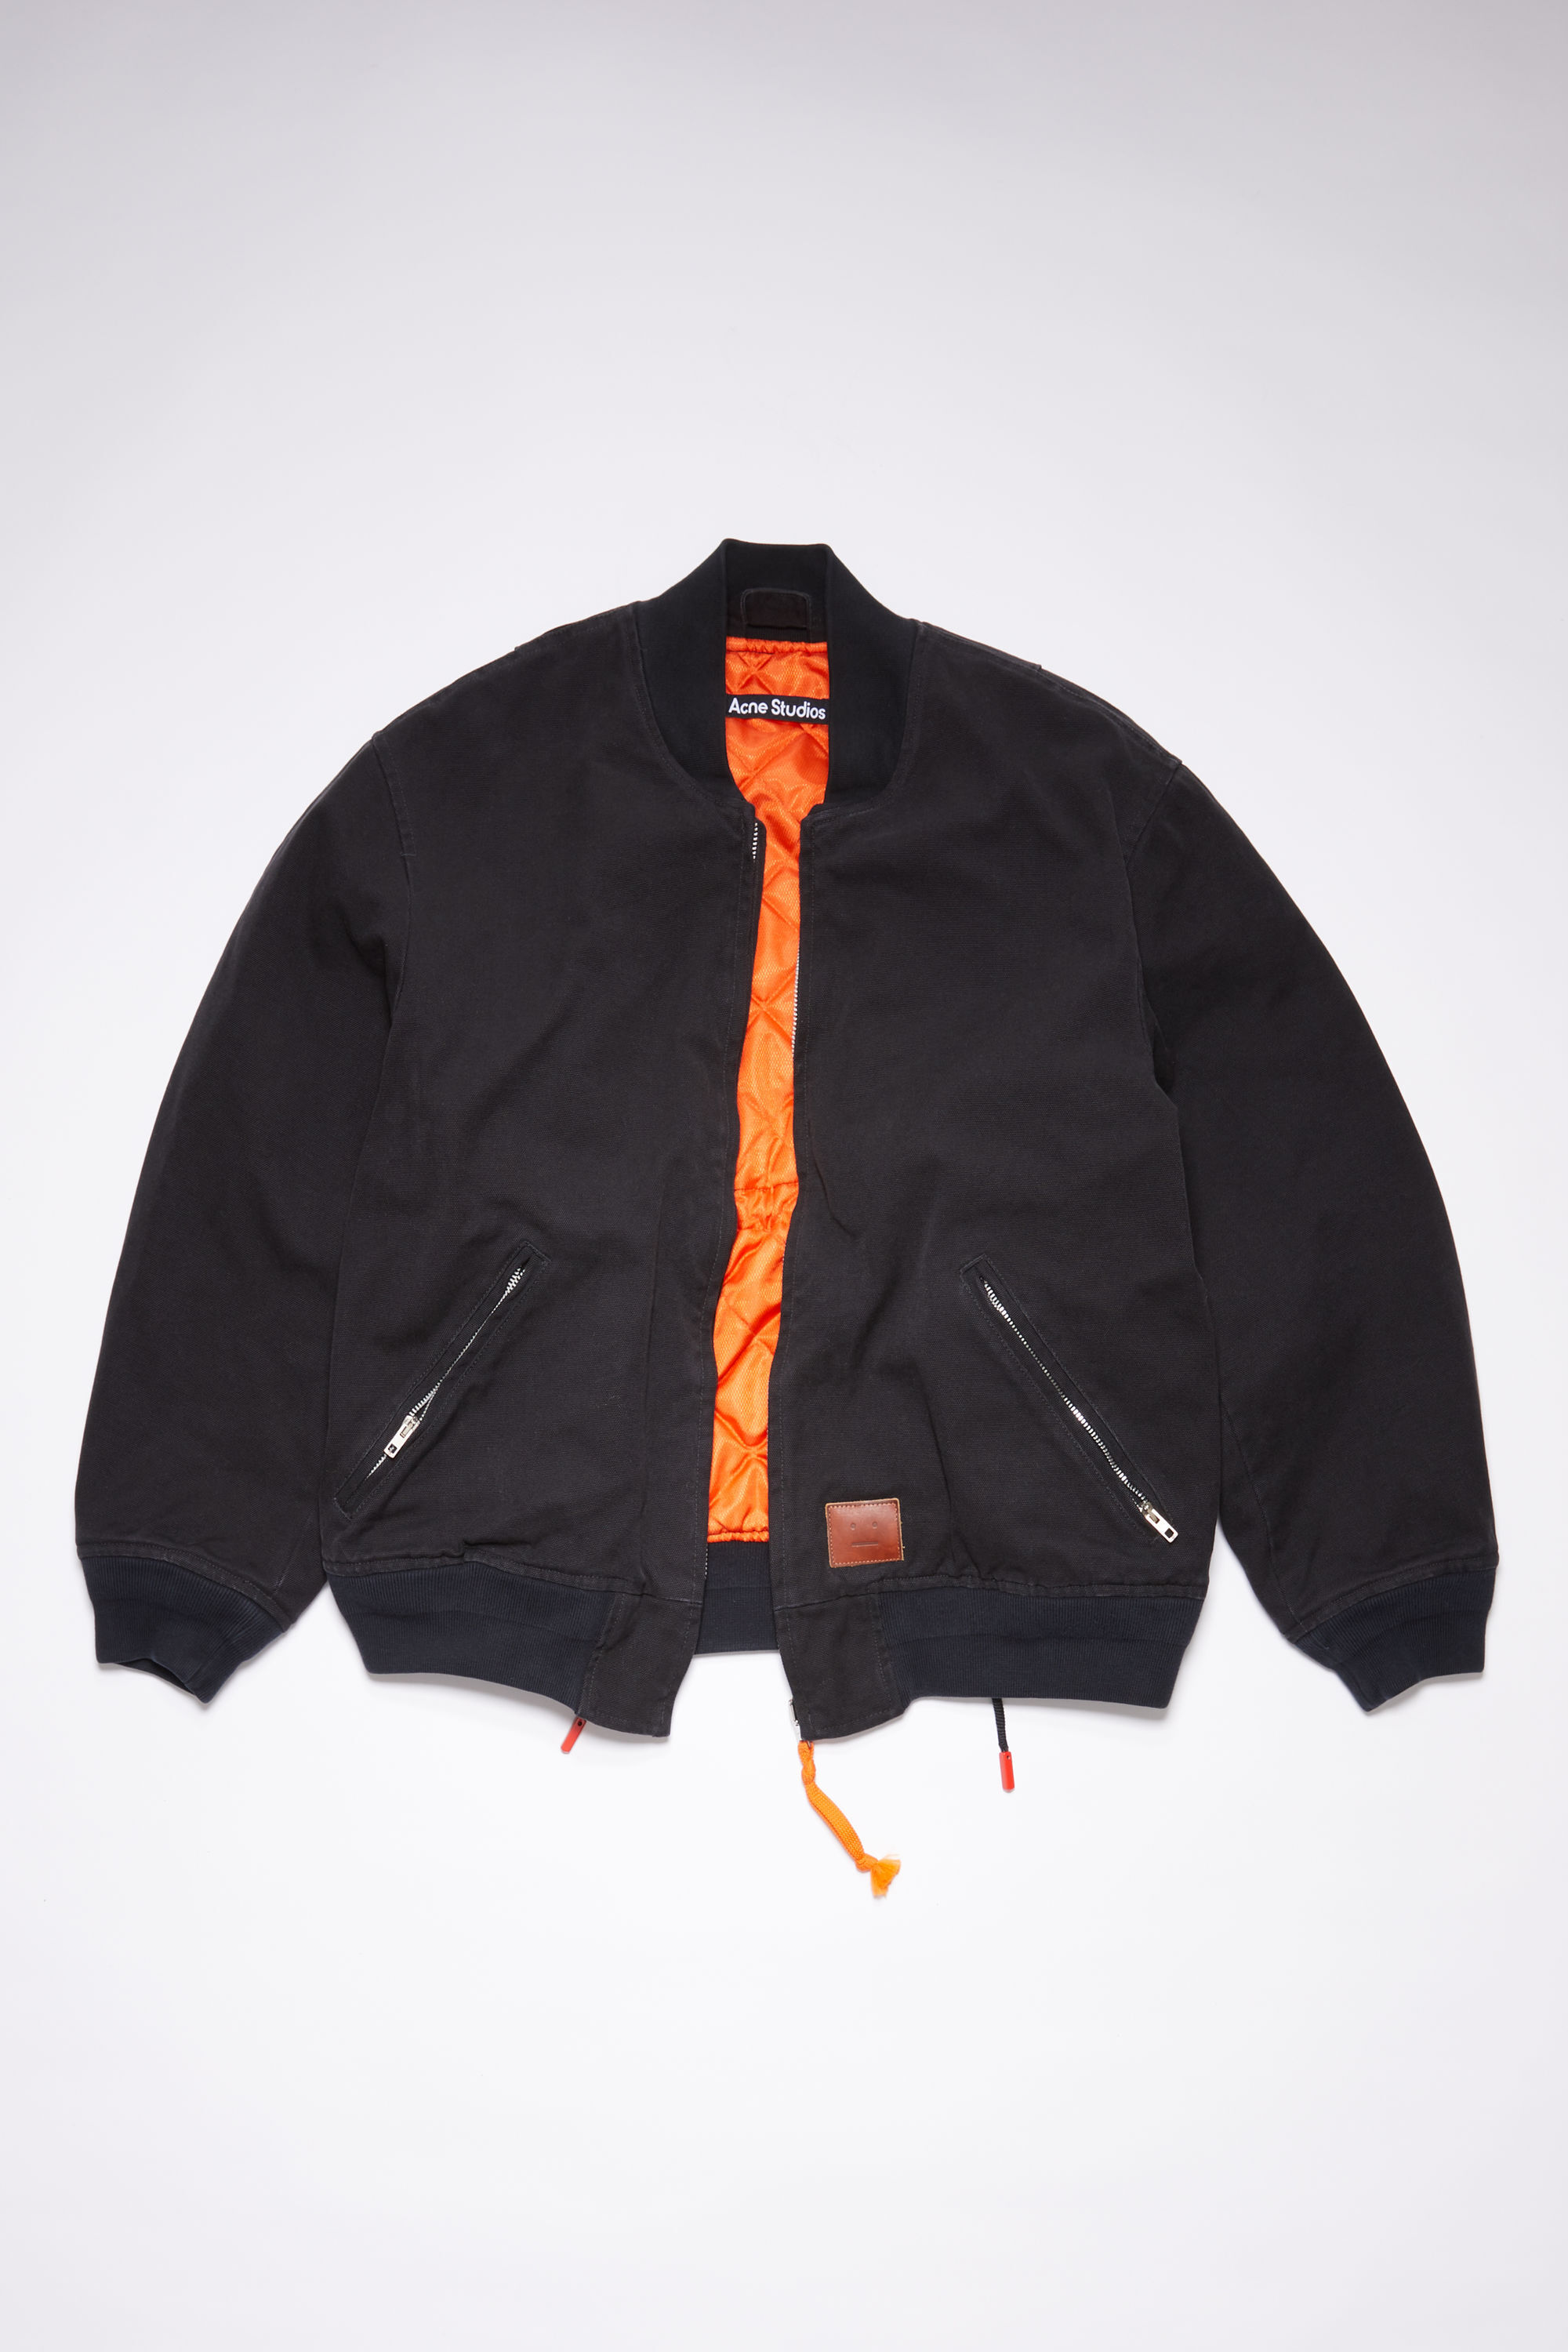 Acne studious cotton bomber jackets - ブルゾン